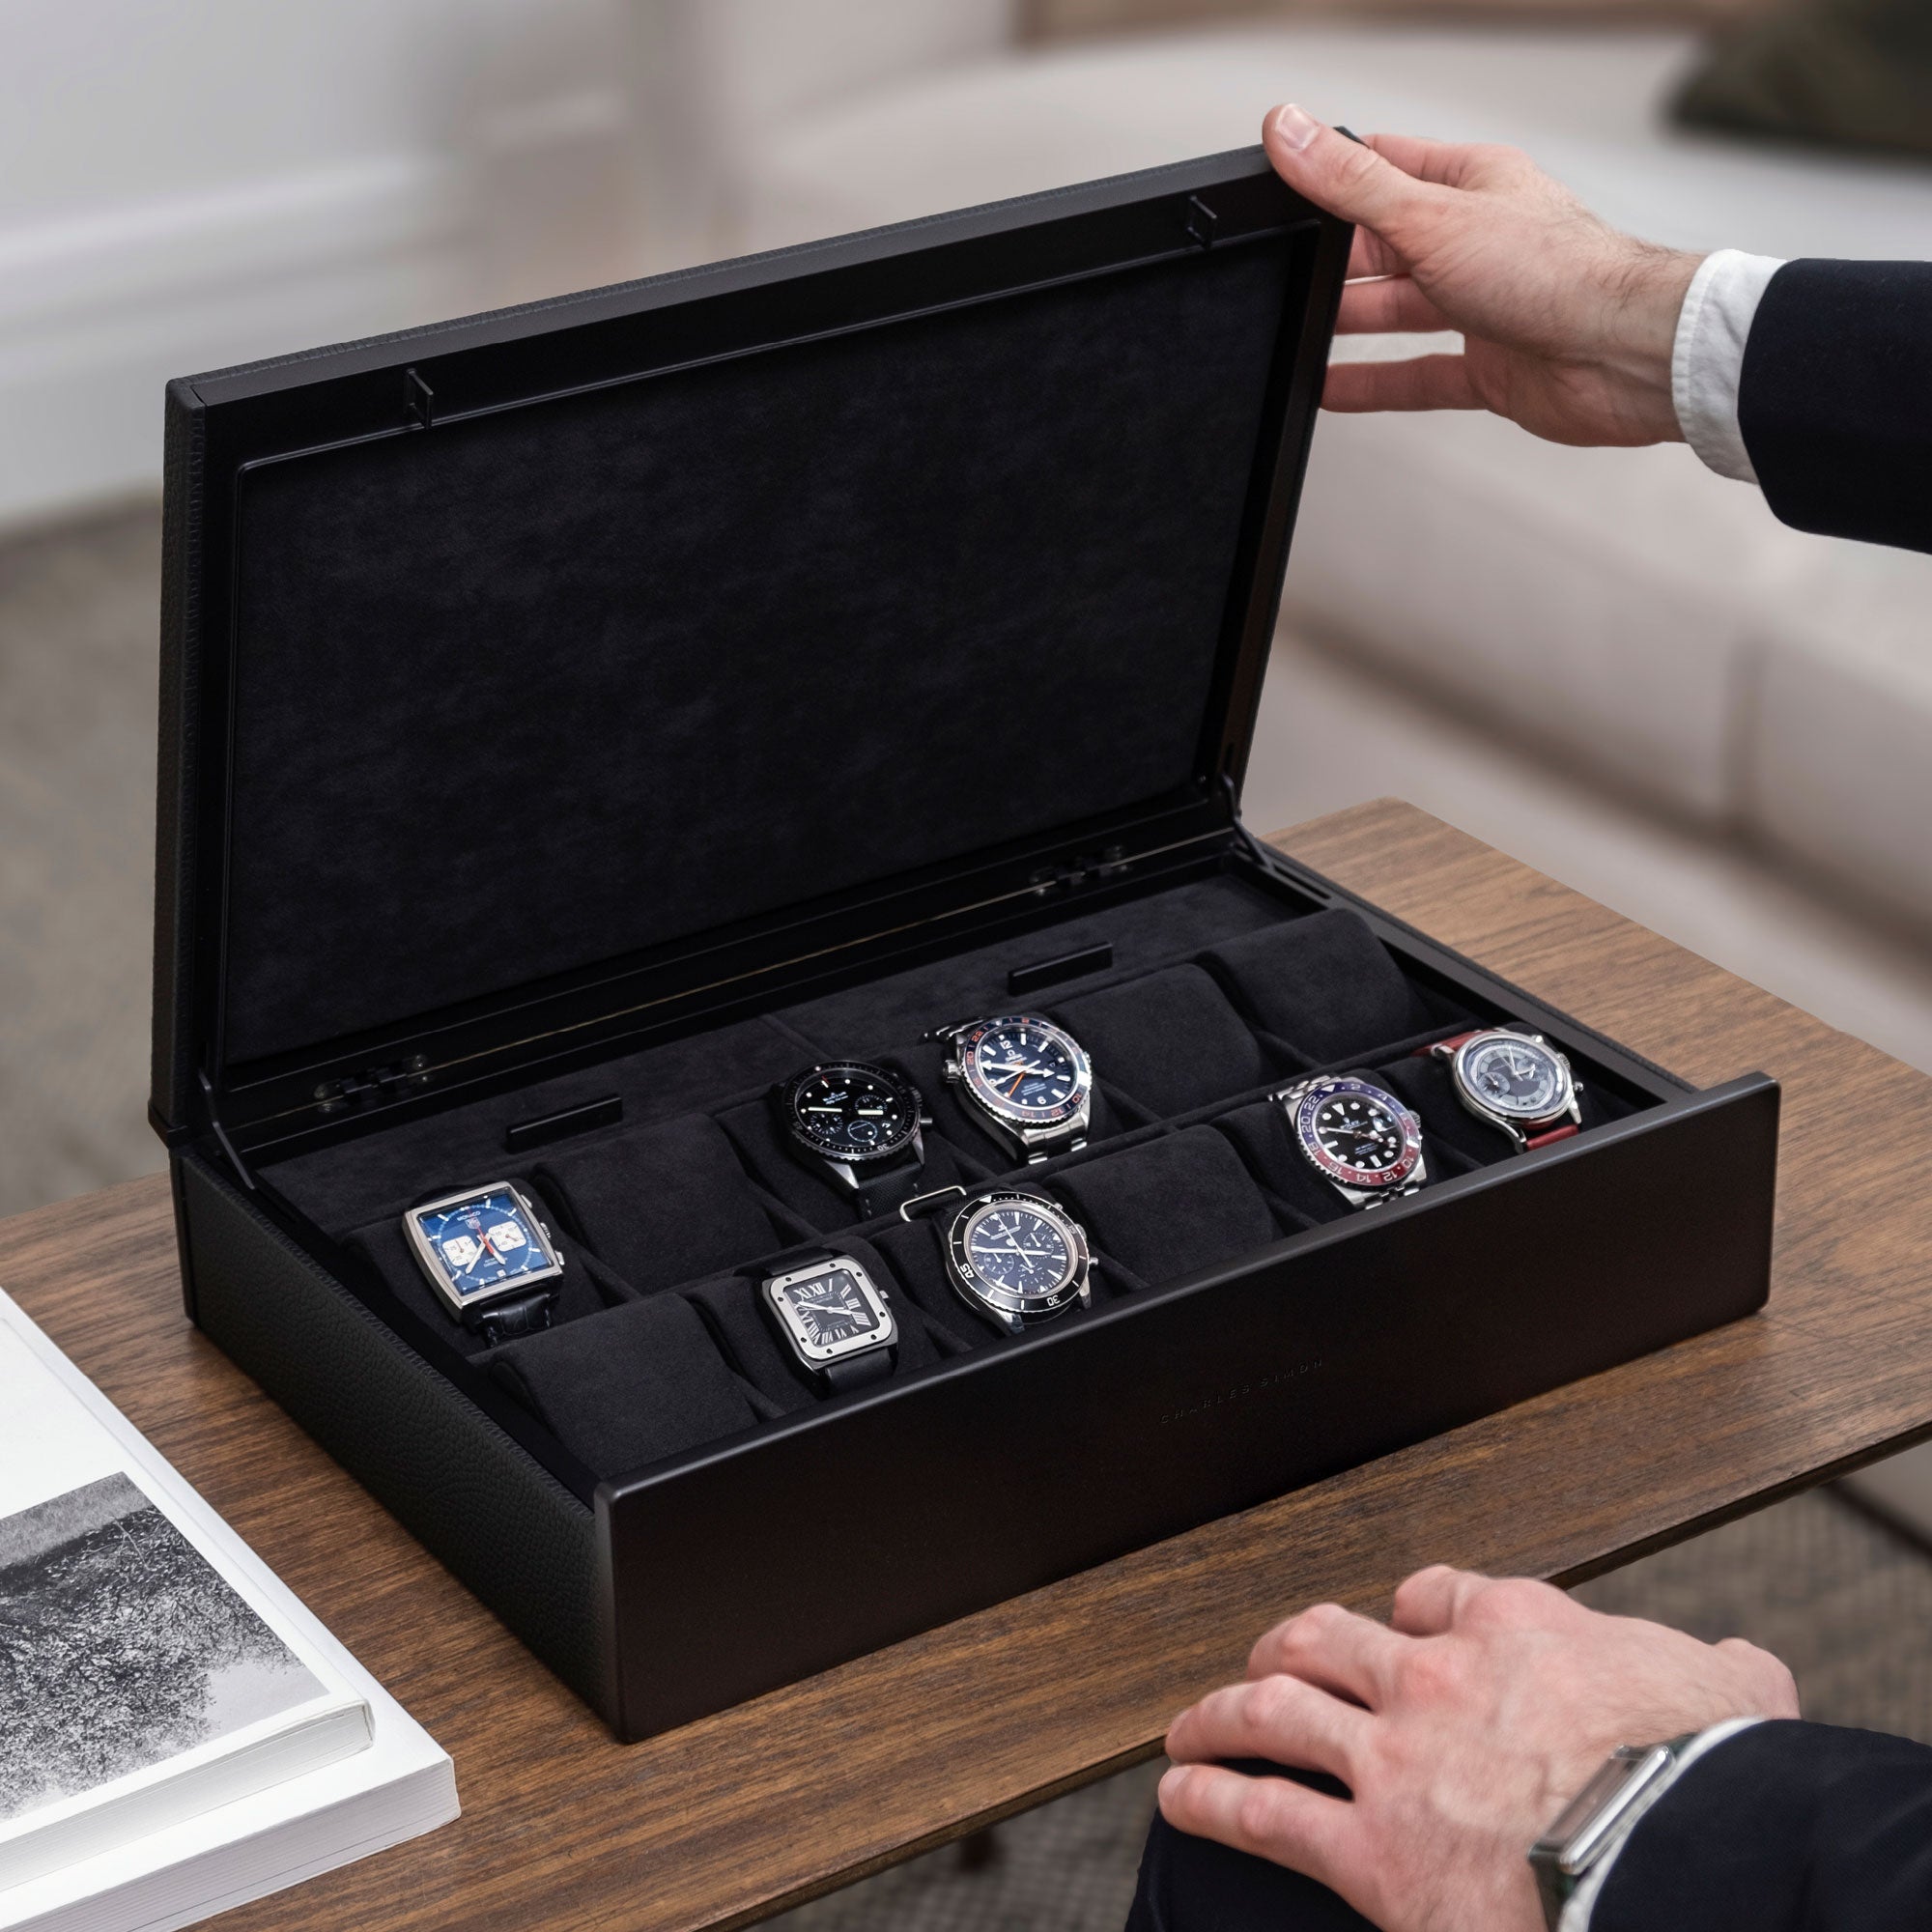 Lifestyle photo of man opening all black Spence 12 Watch box with luxury watch collection displayed inside